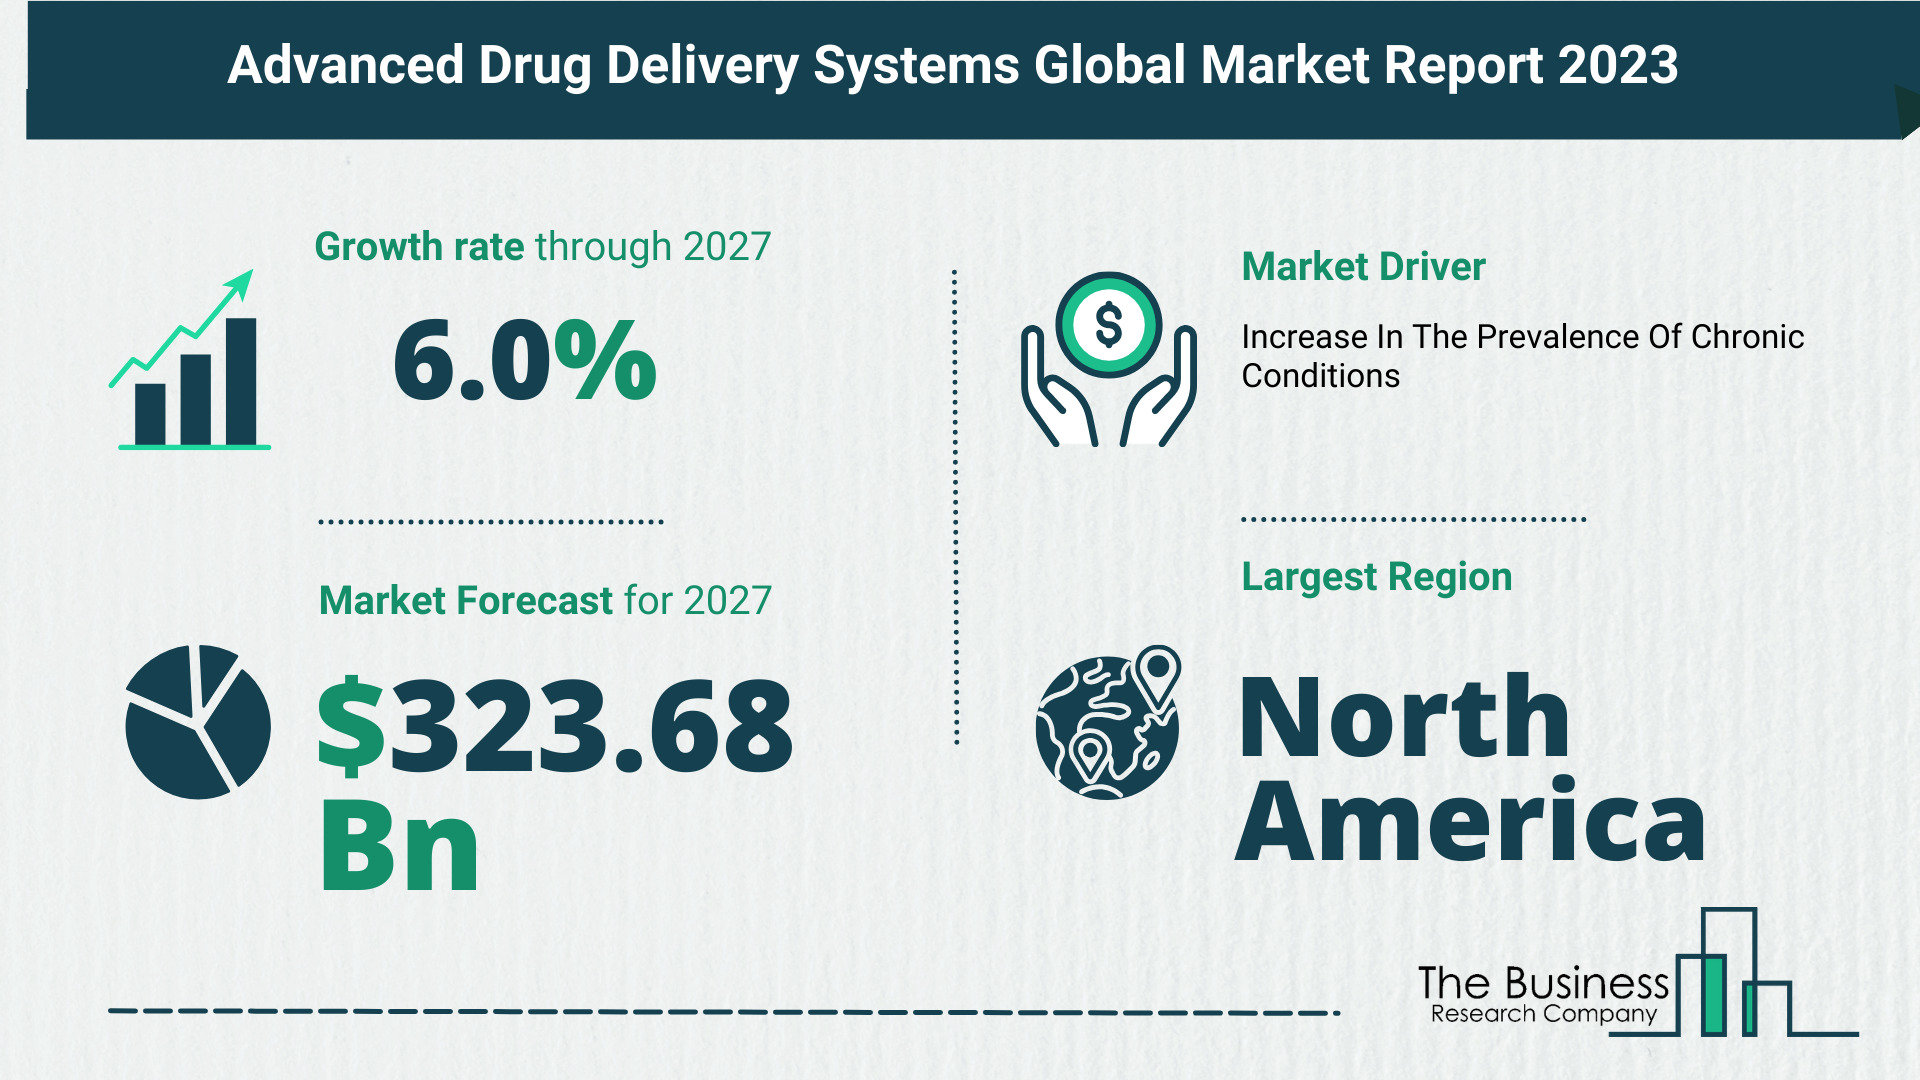 Overview Of The Advanced Drug Delivery Systems Market 2023: Size, Drivers, And Trends